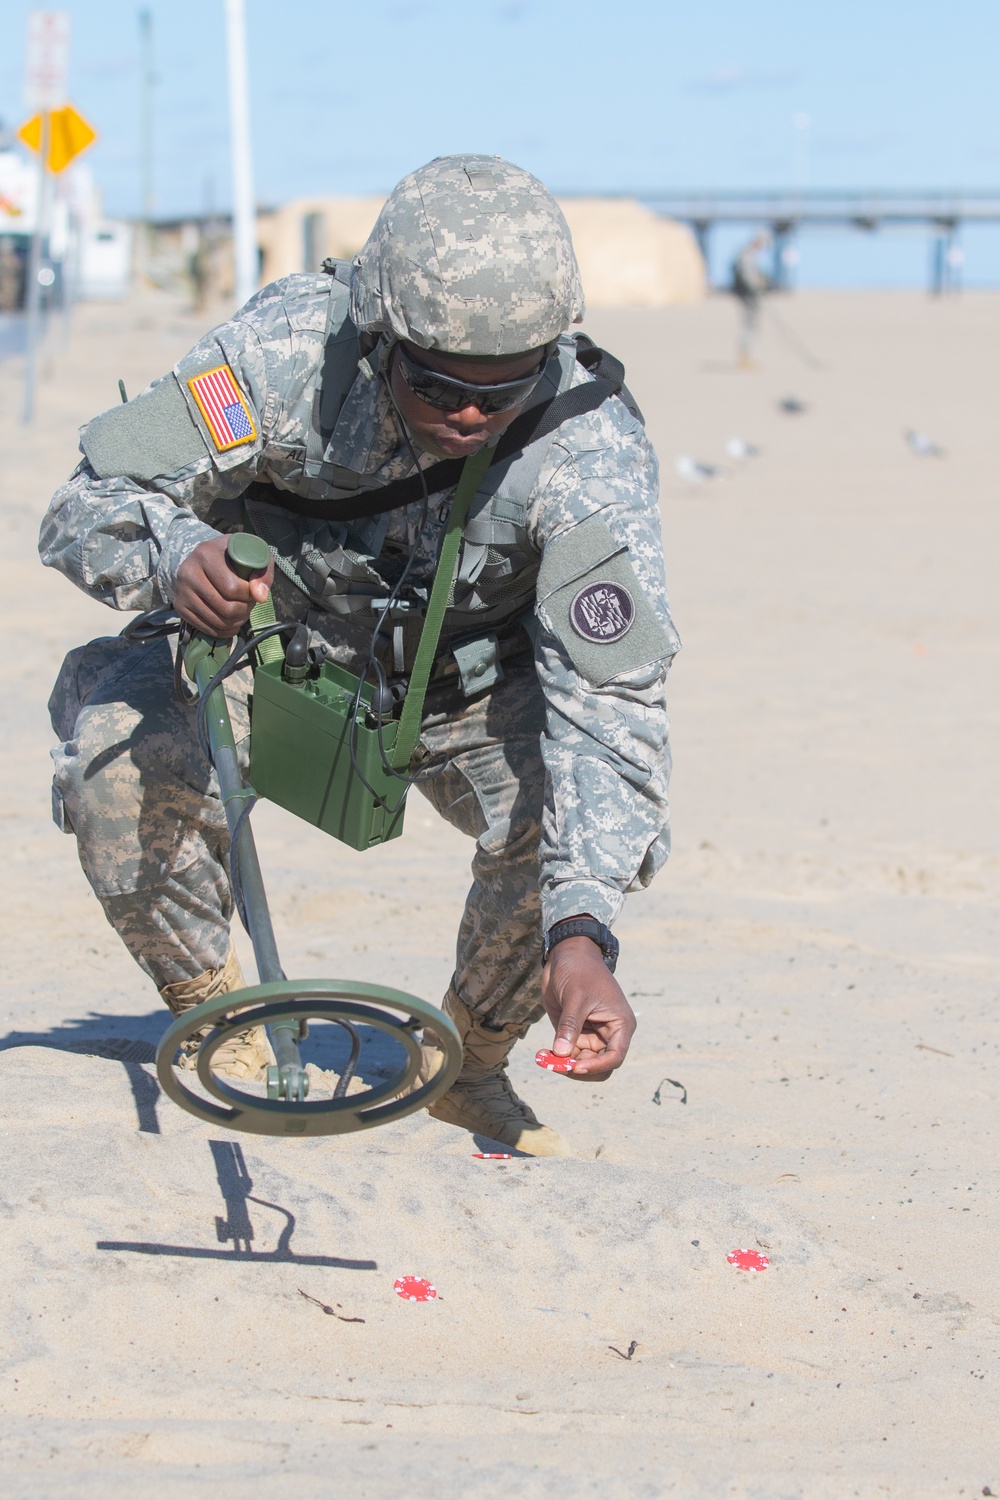 Engineers take charge in finding mines in exercise